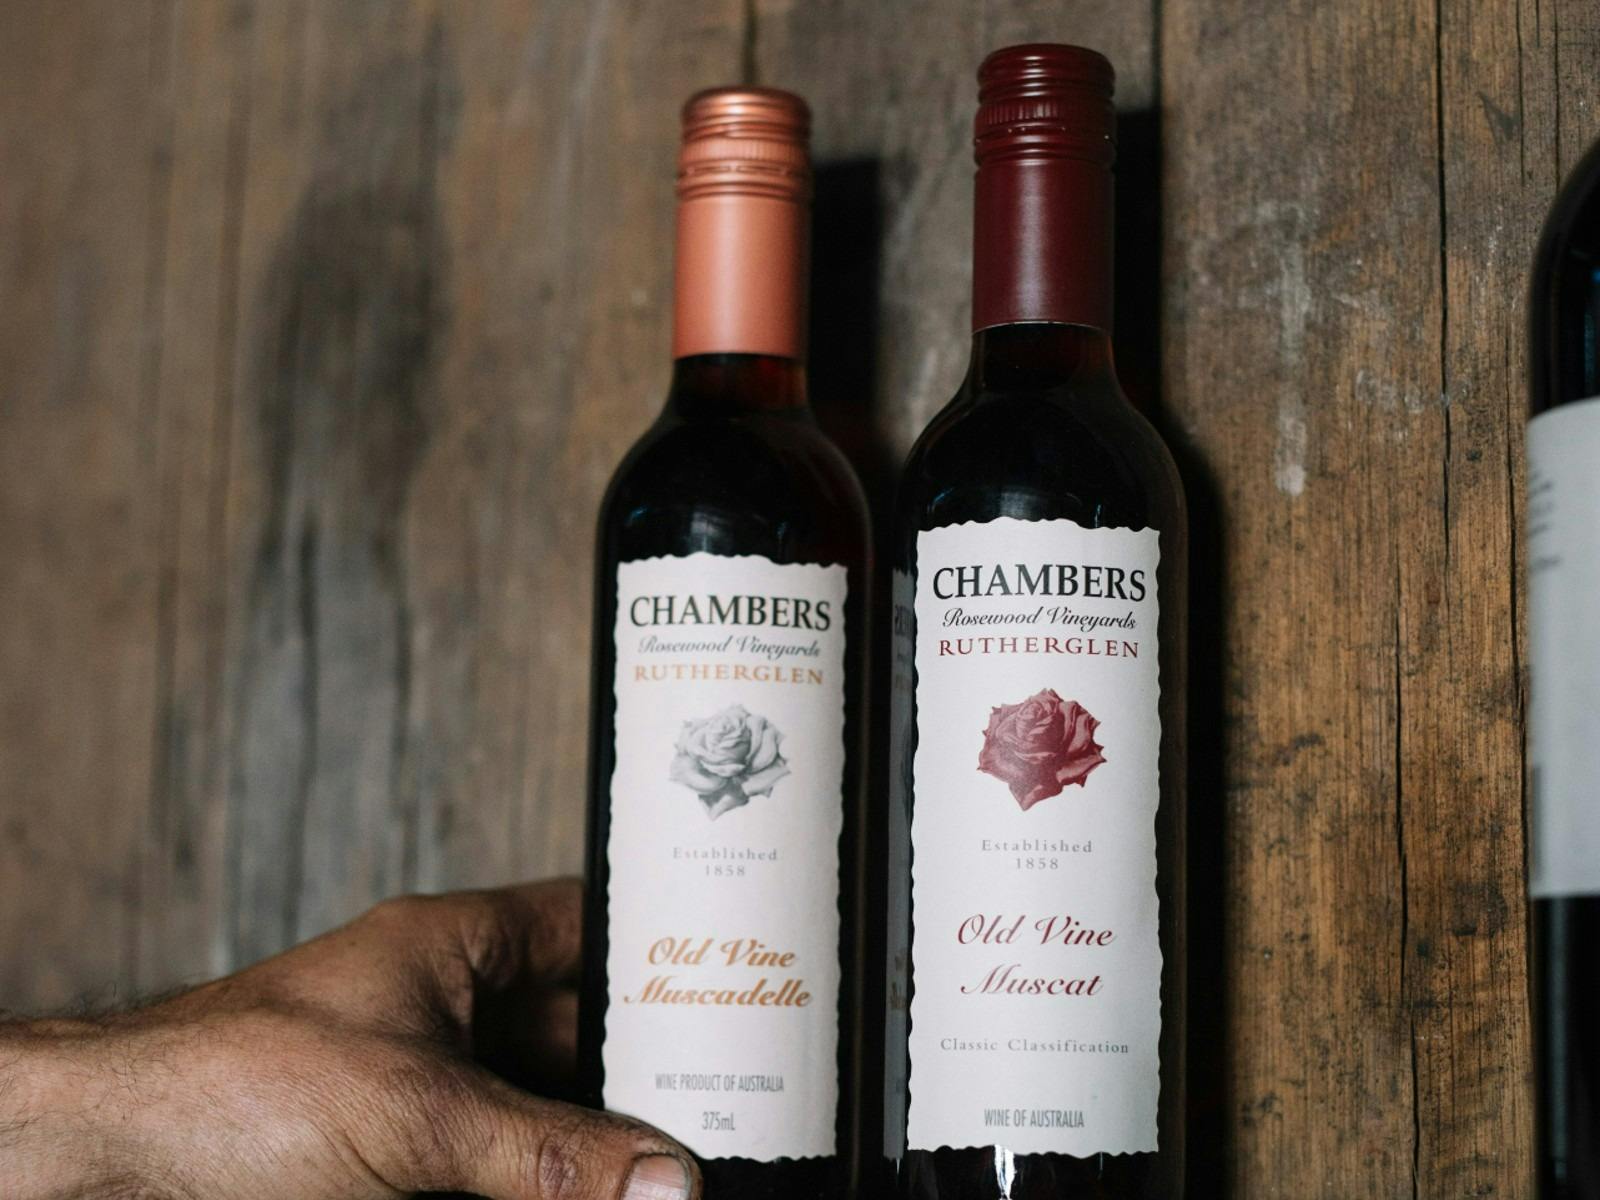 Enjoy a Muscat taste and History Tour around Chambers Winery